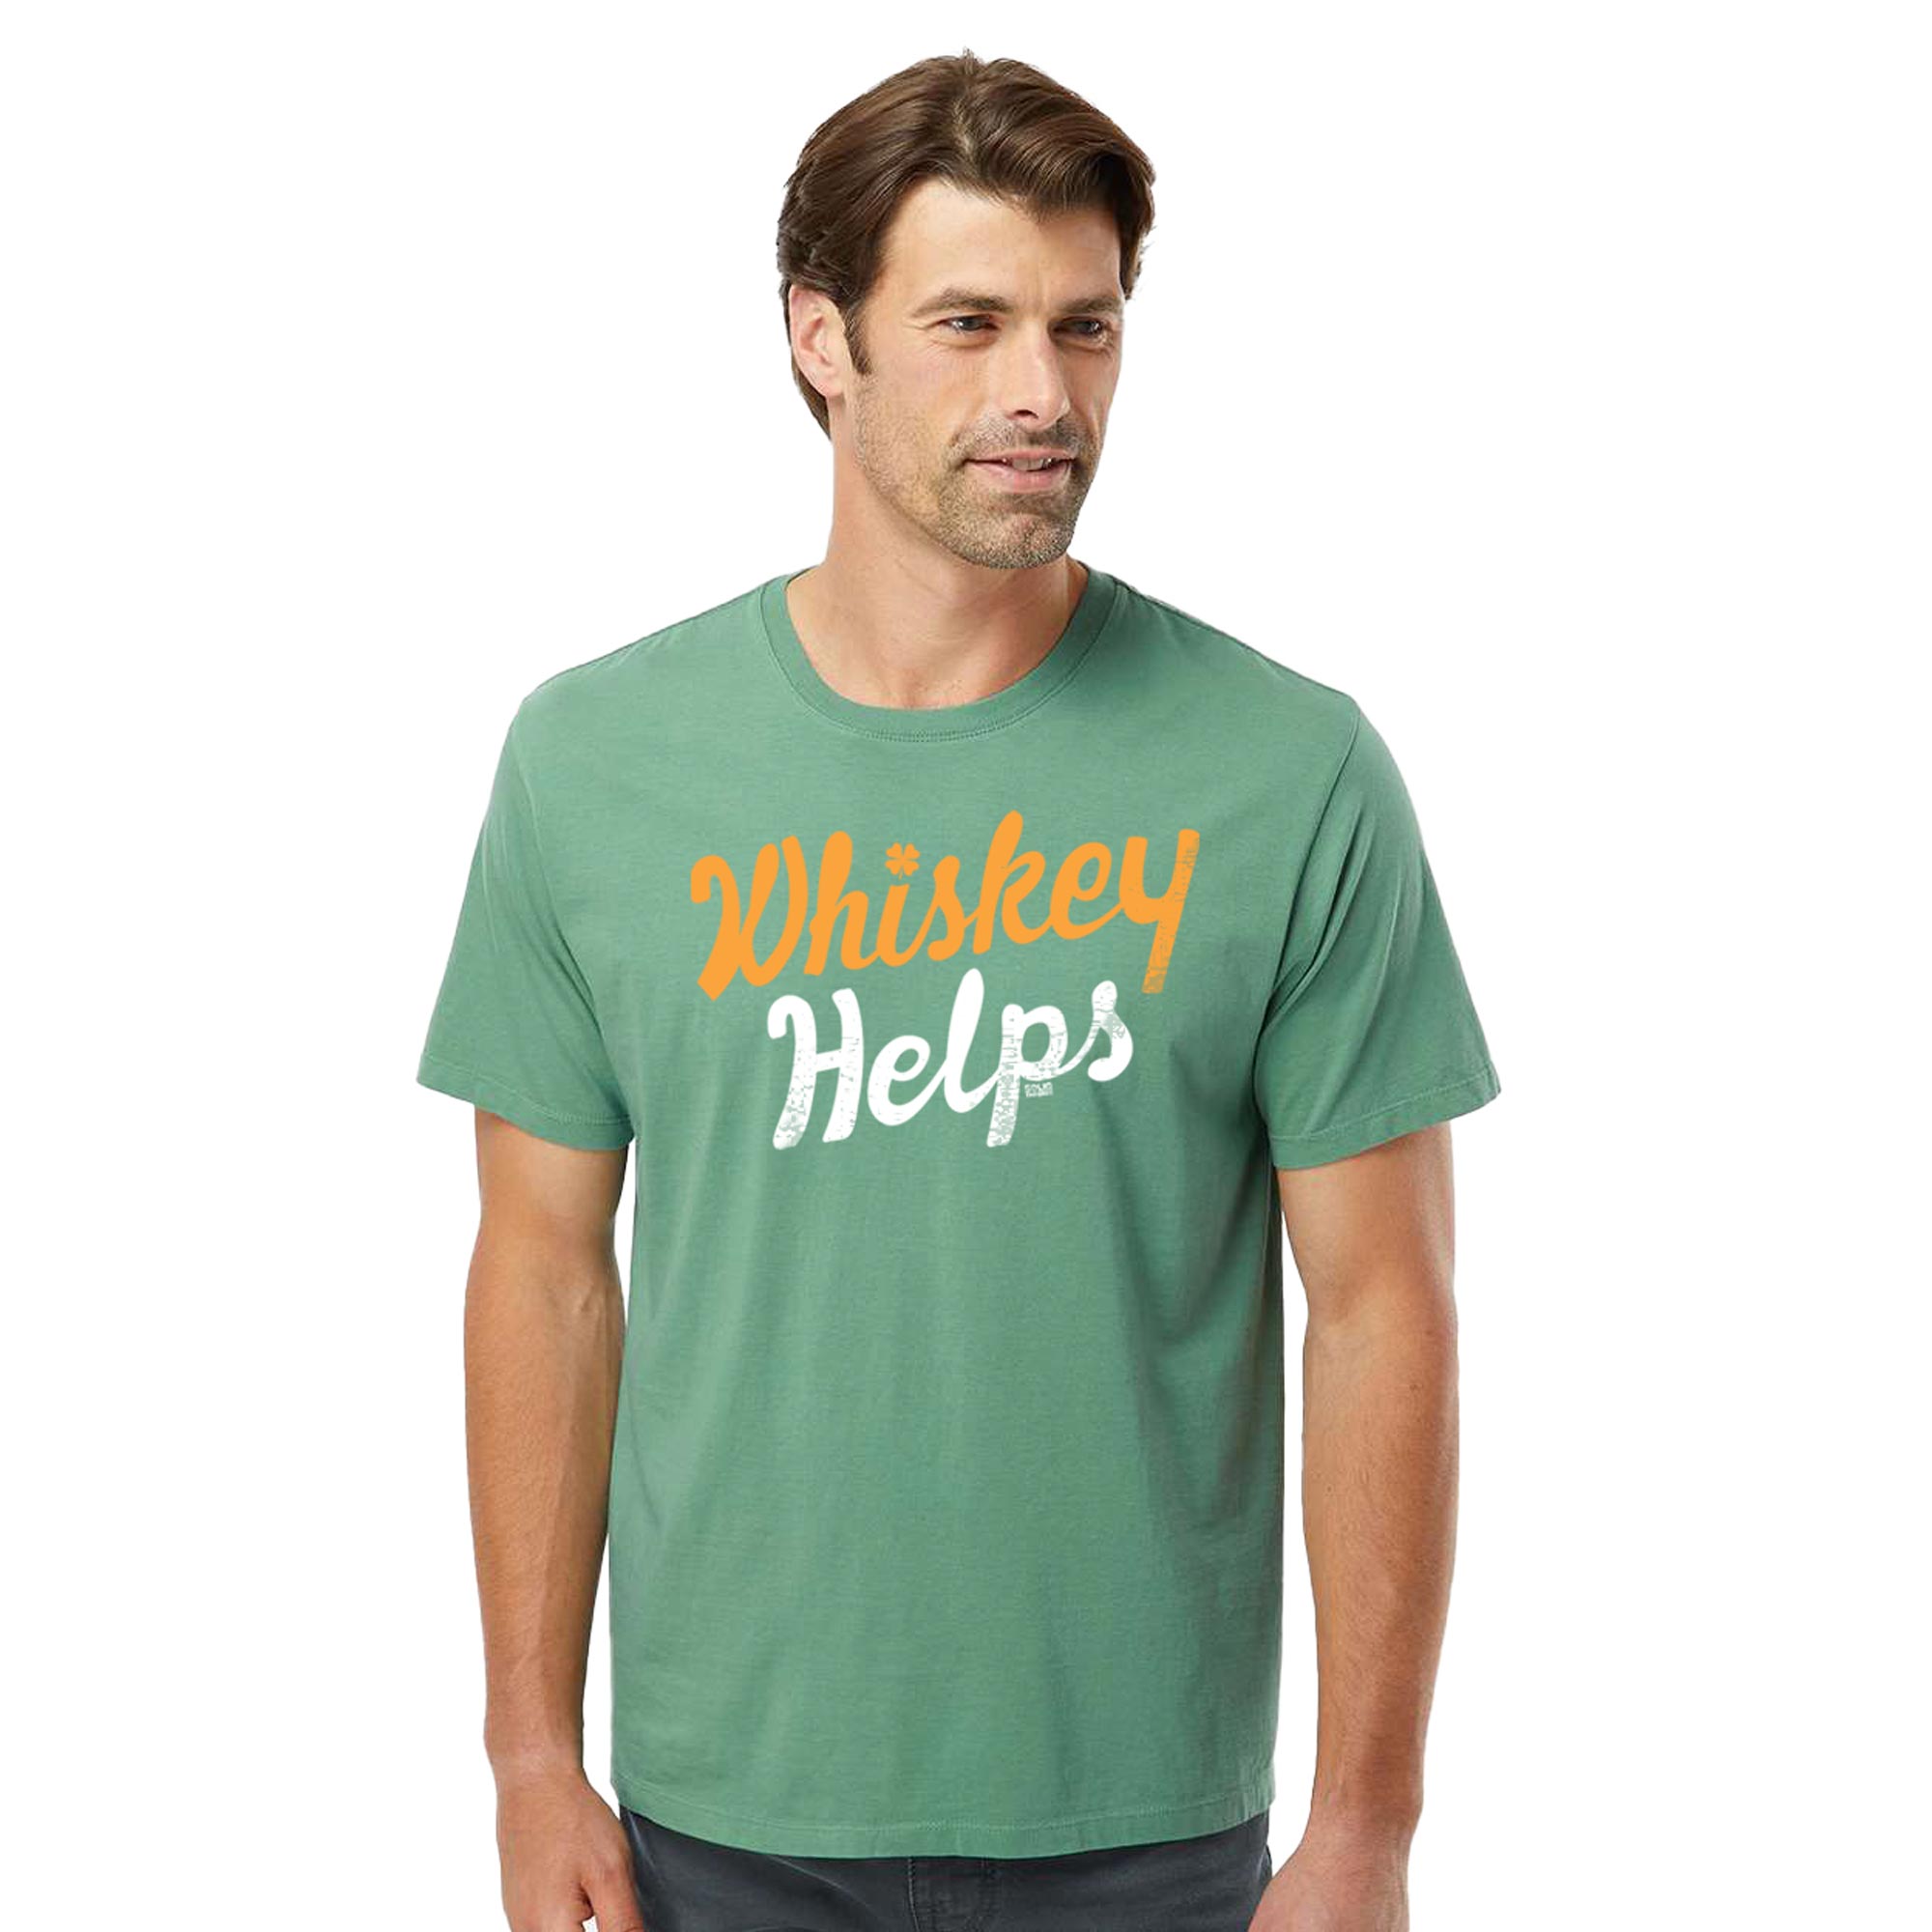 Irish Whiskey Helps Funny Organic Cotton T-shirt | Vintage St Paddy's  Tee On Model | Solid Threads